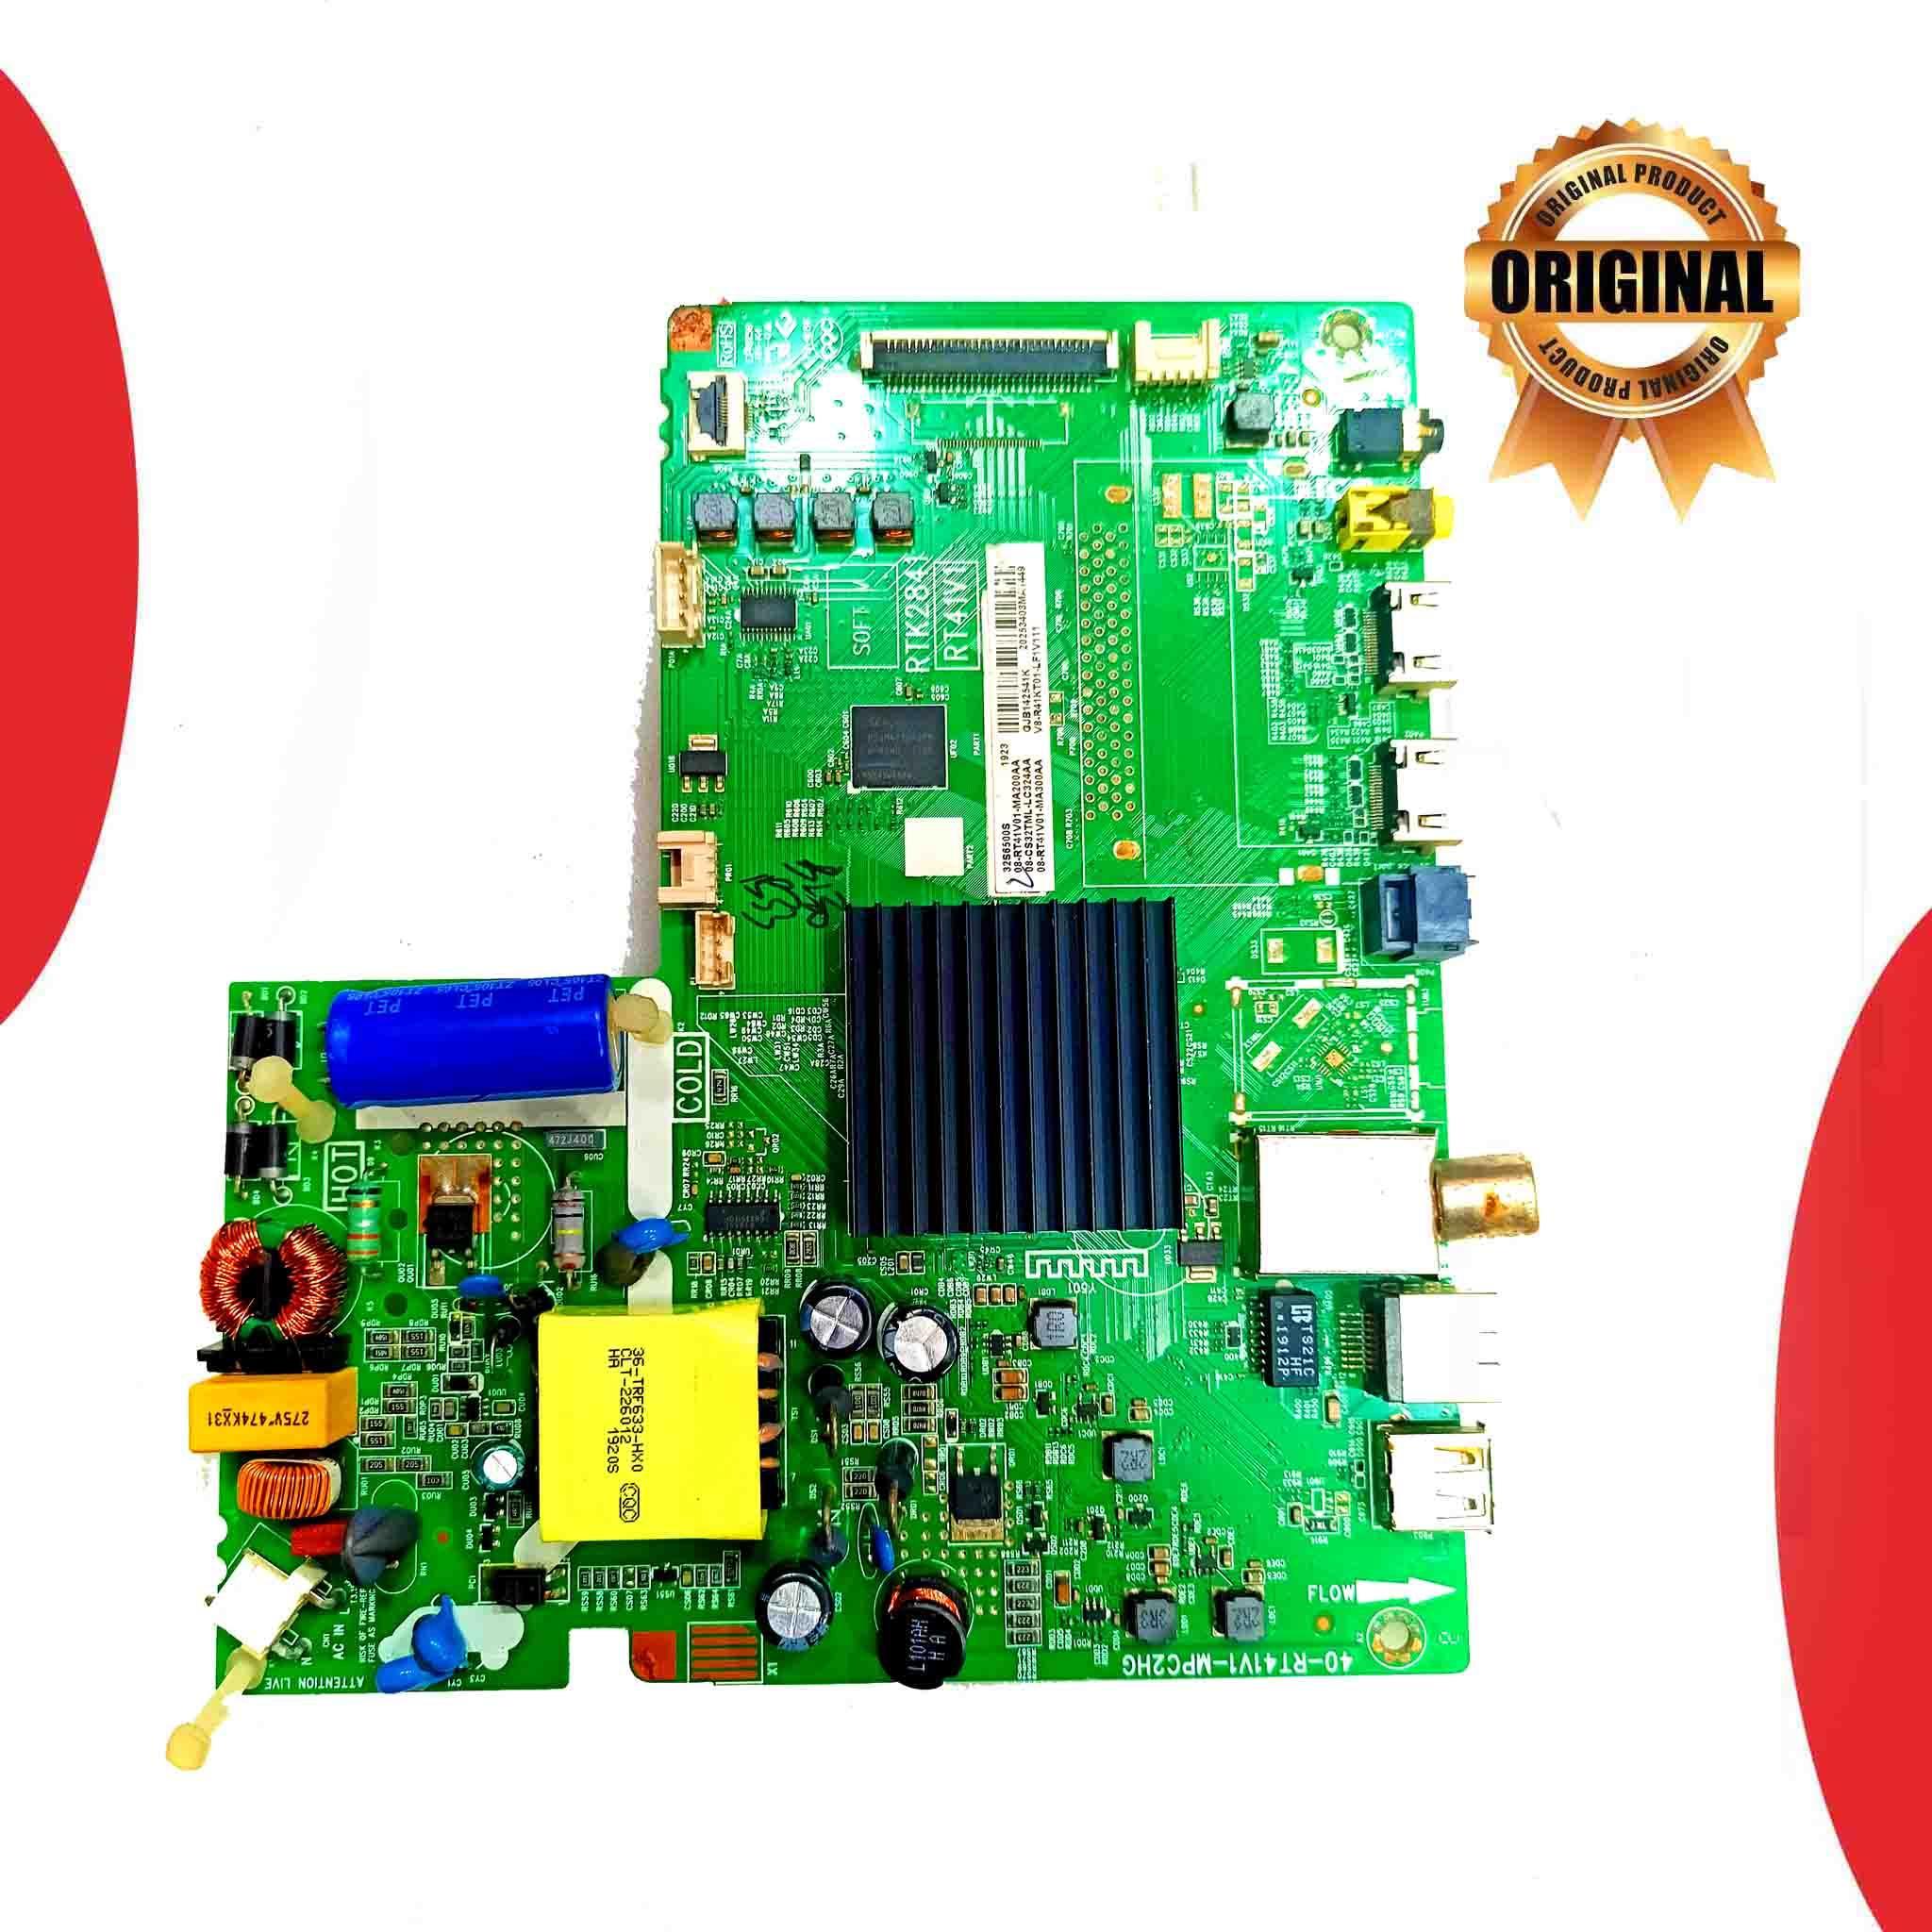 Model 32S6500S TCL LED TV Motherboard - Great Bharat Electronics